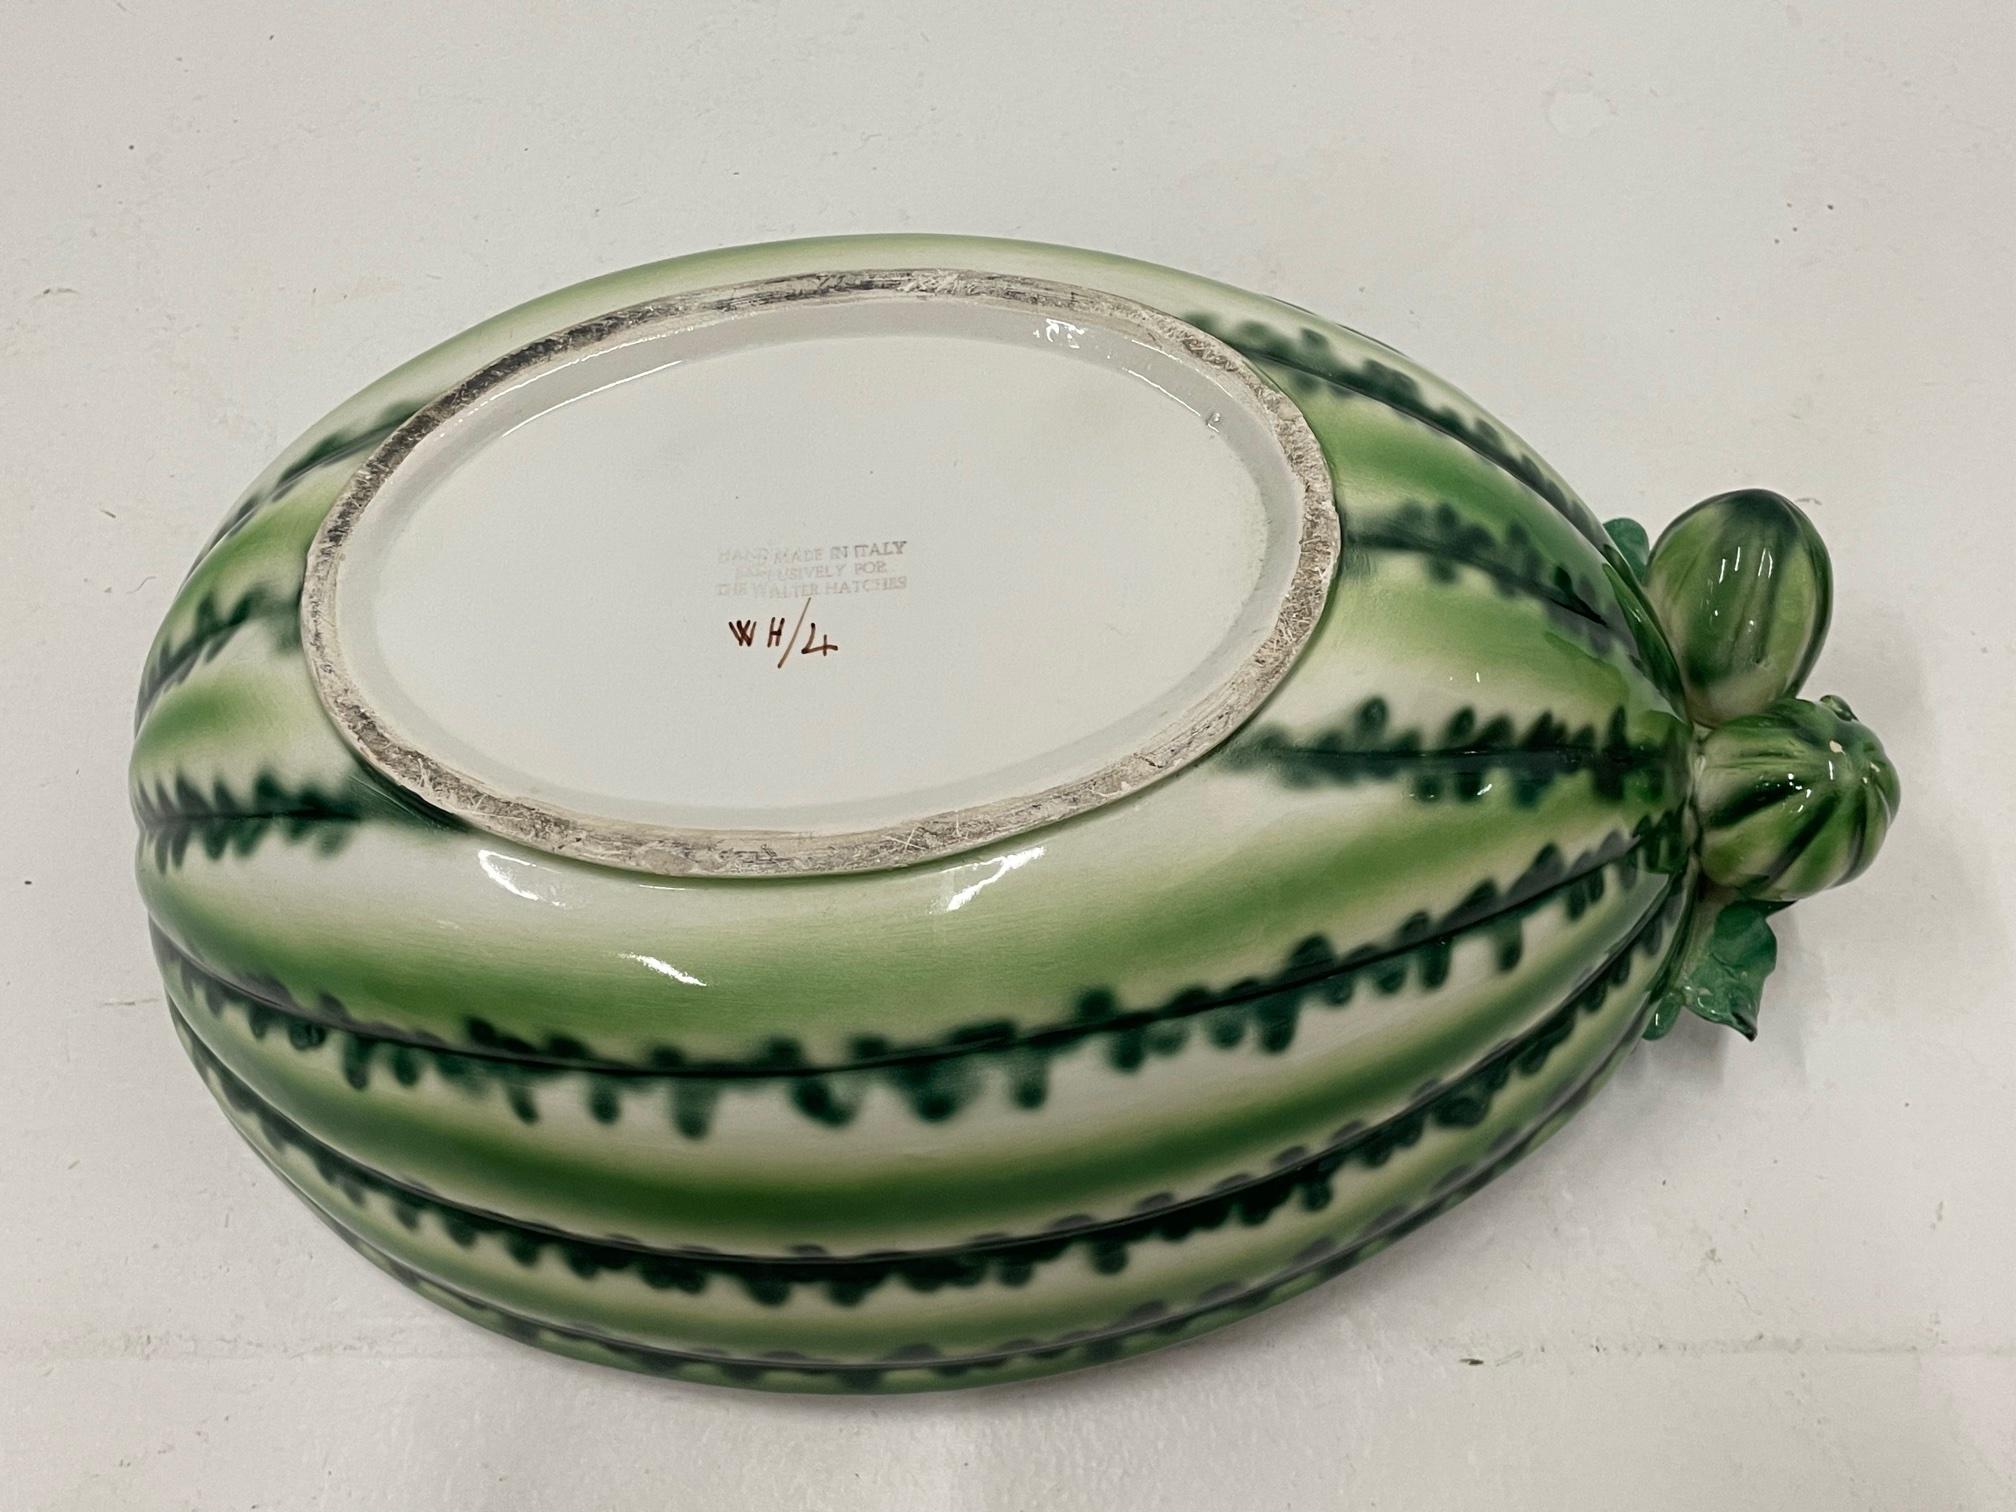 Juicy Set of 12 Watermelon Motife Italian Pottery Dishes and Serving Bowl For Sale 1